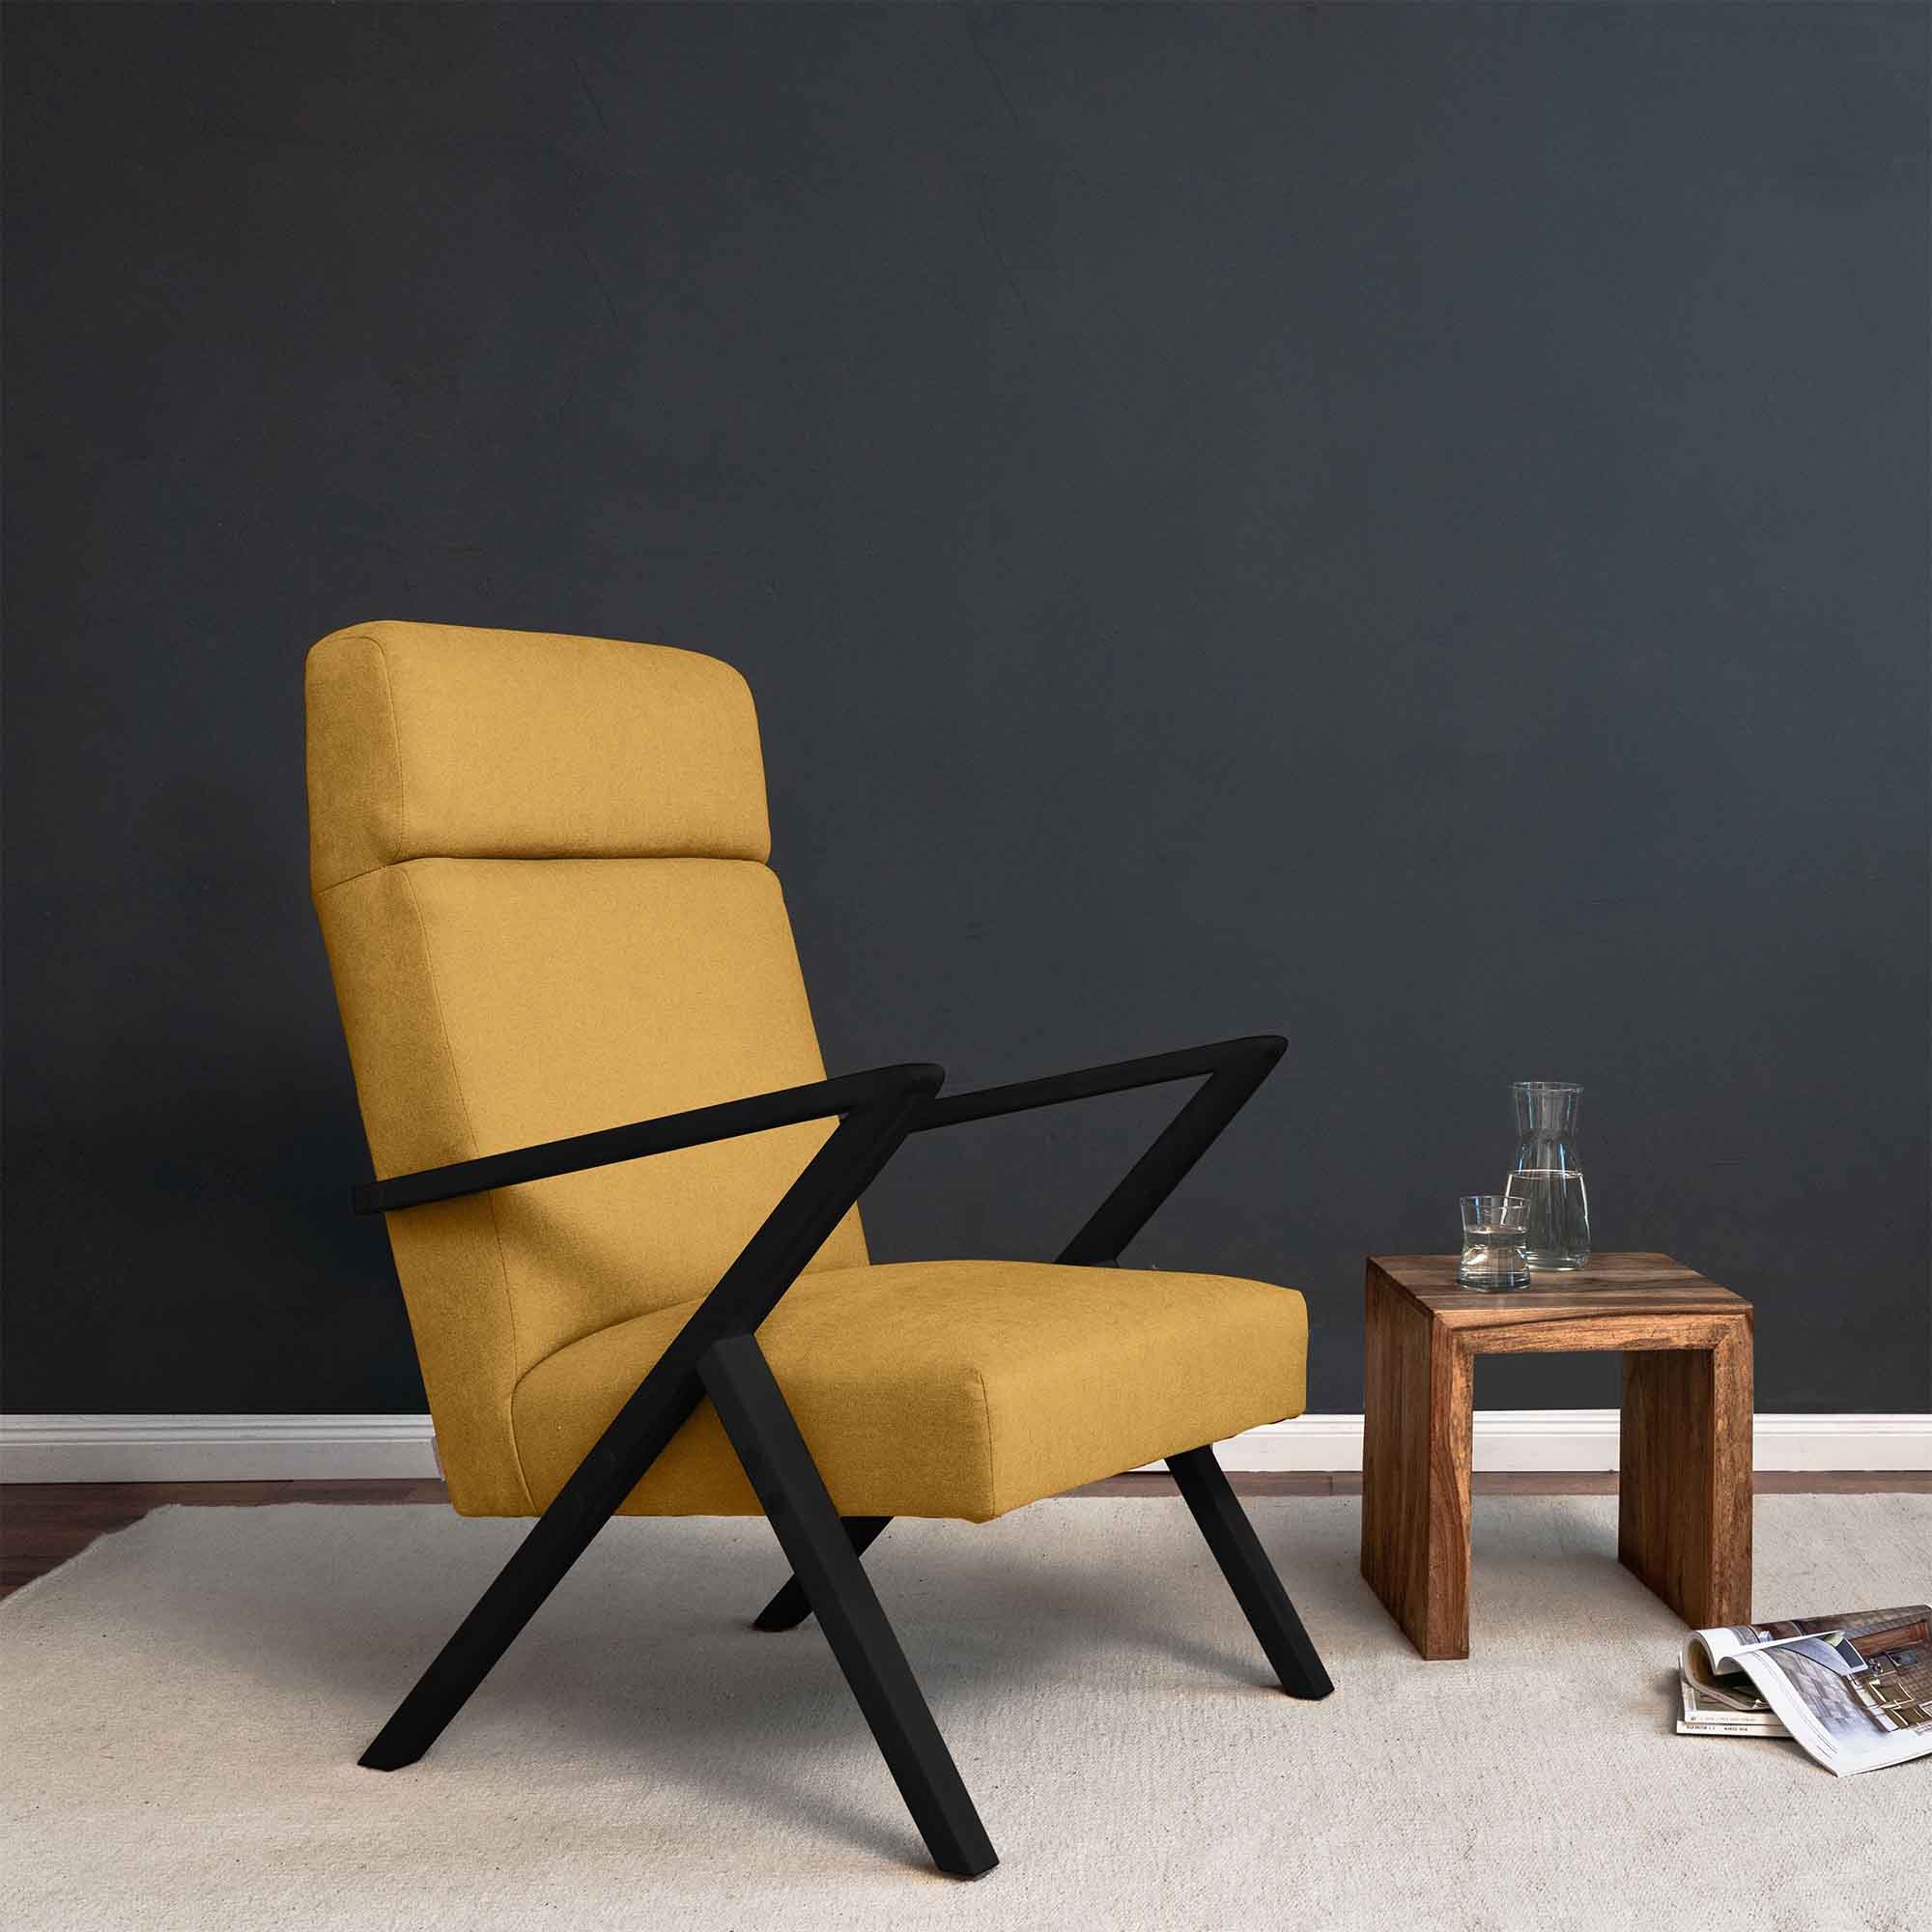 Lounge Chair, Beech Wood Frame, Black Lacquered yellow fabric, right side, interior view